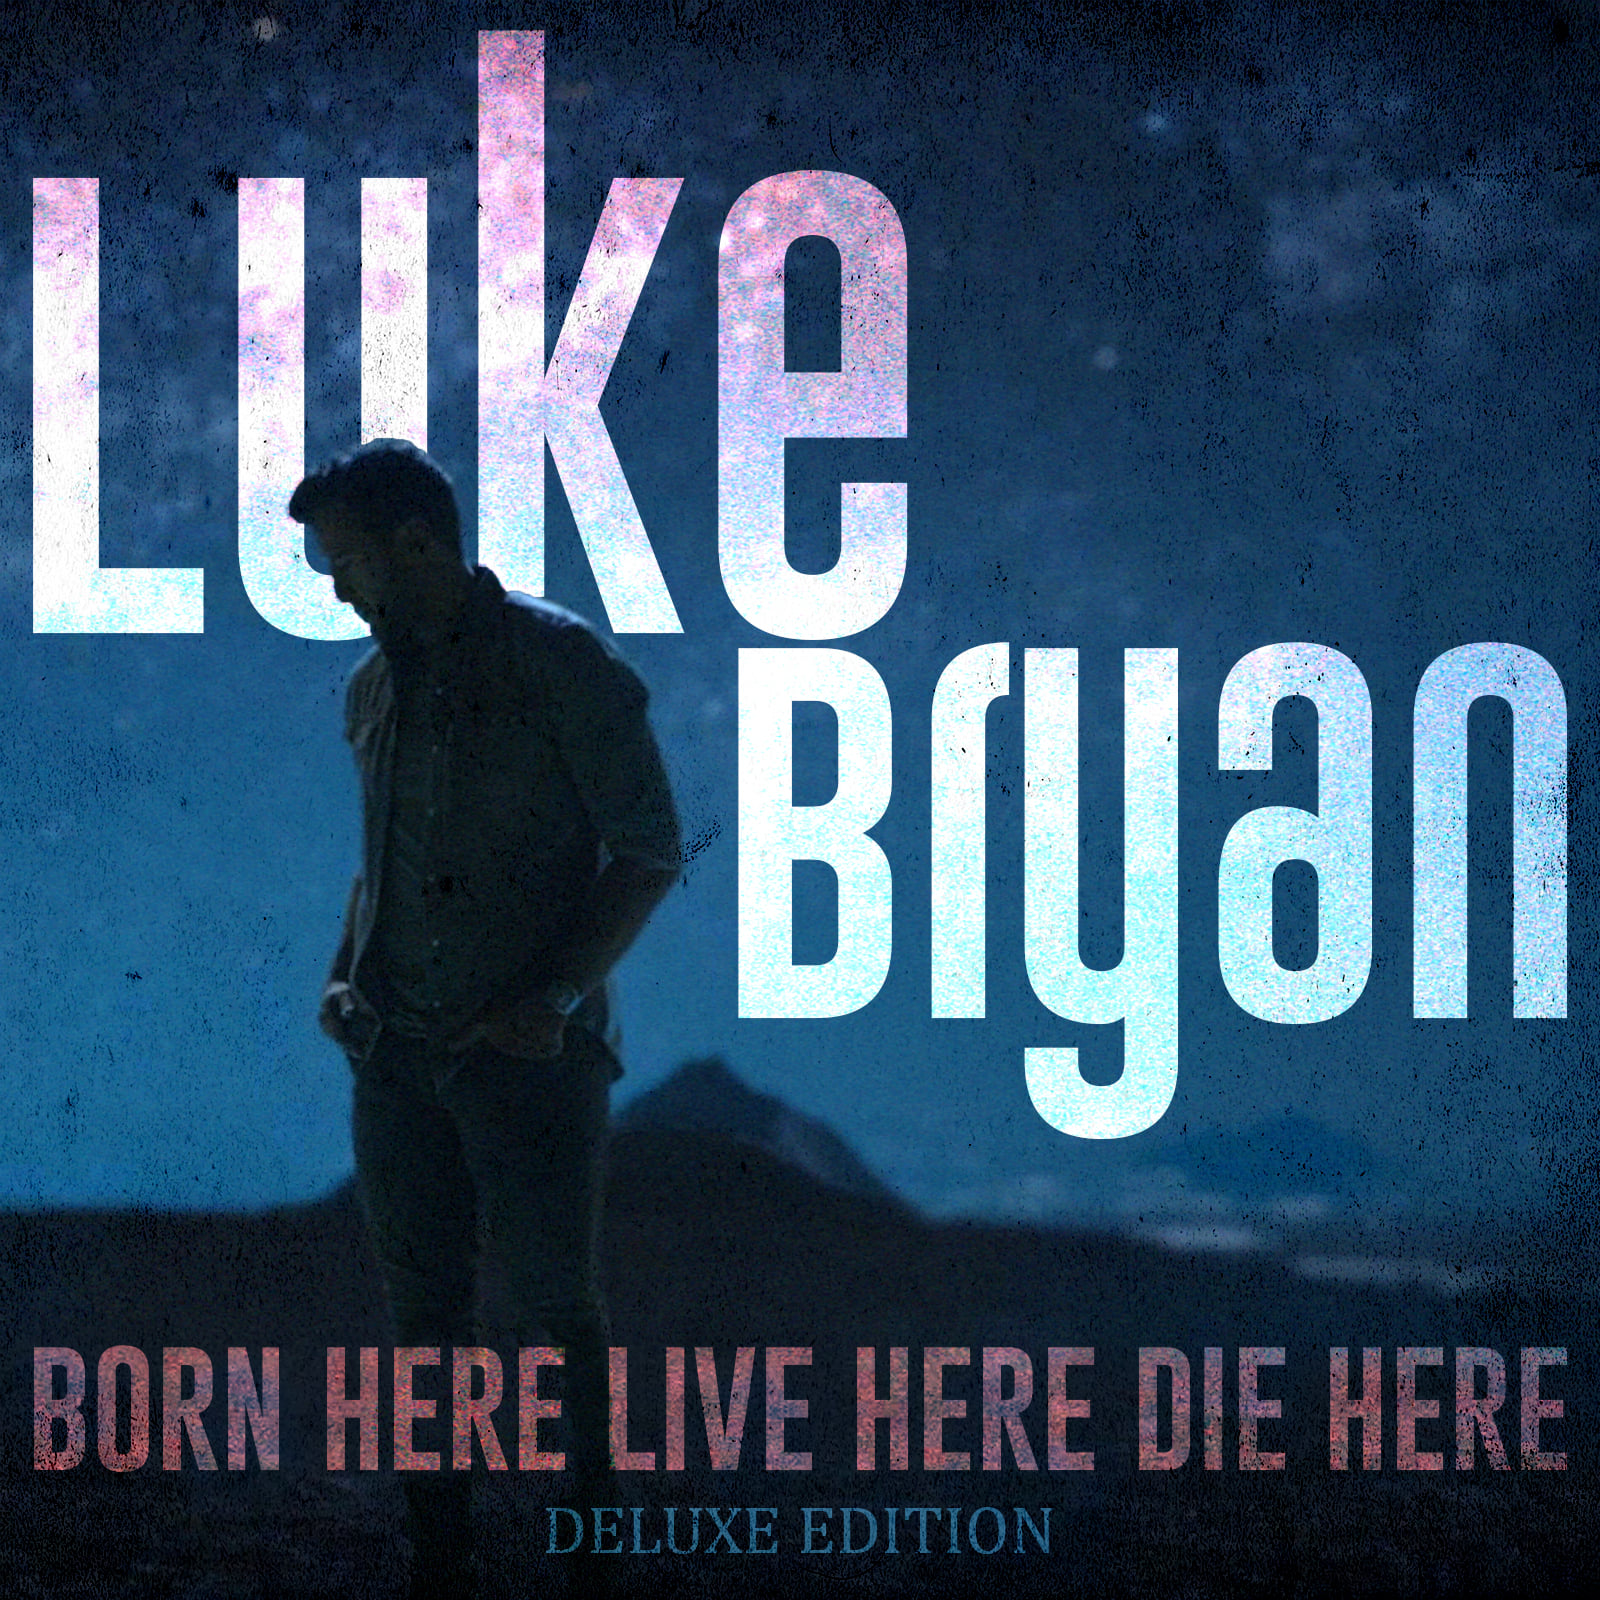 Luke Bryan's 'Born Here Live Here Die Here' Deluxe Edition is Due Out April 9th, 2021